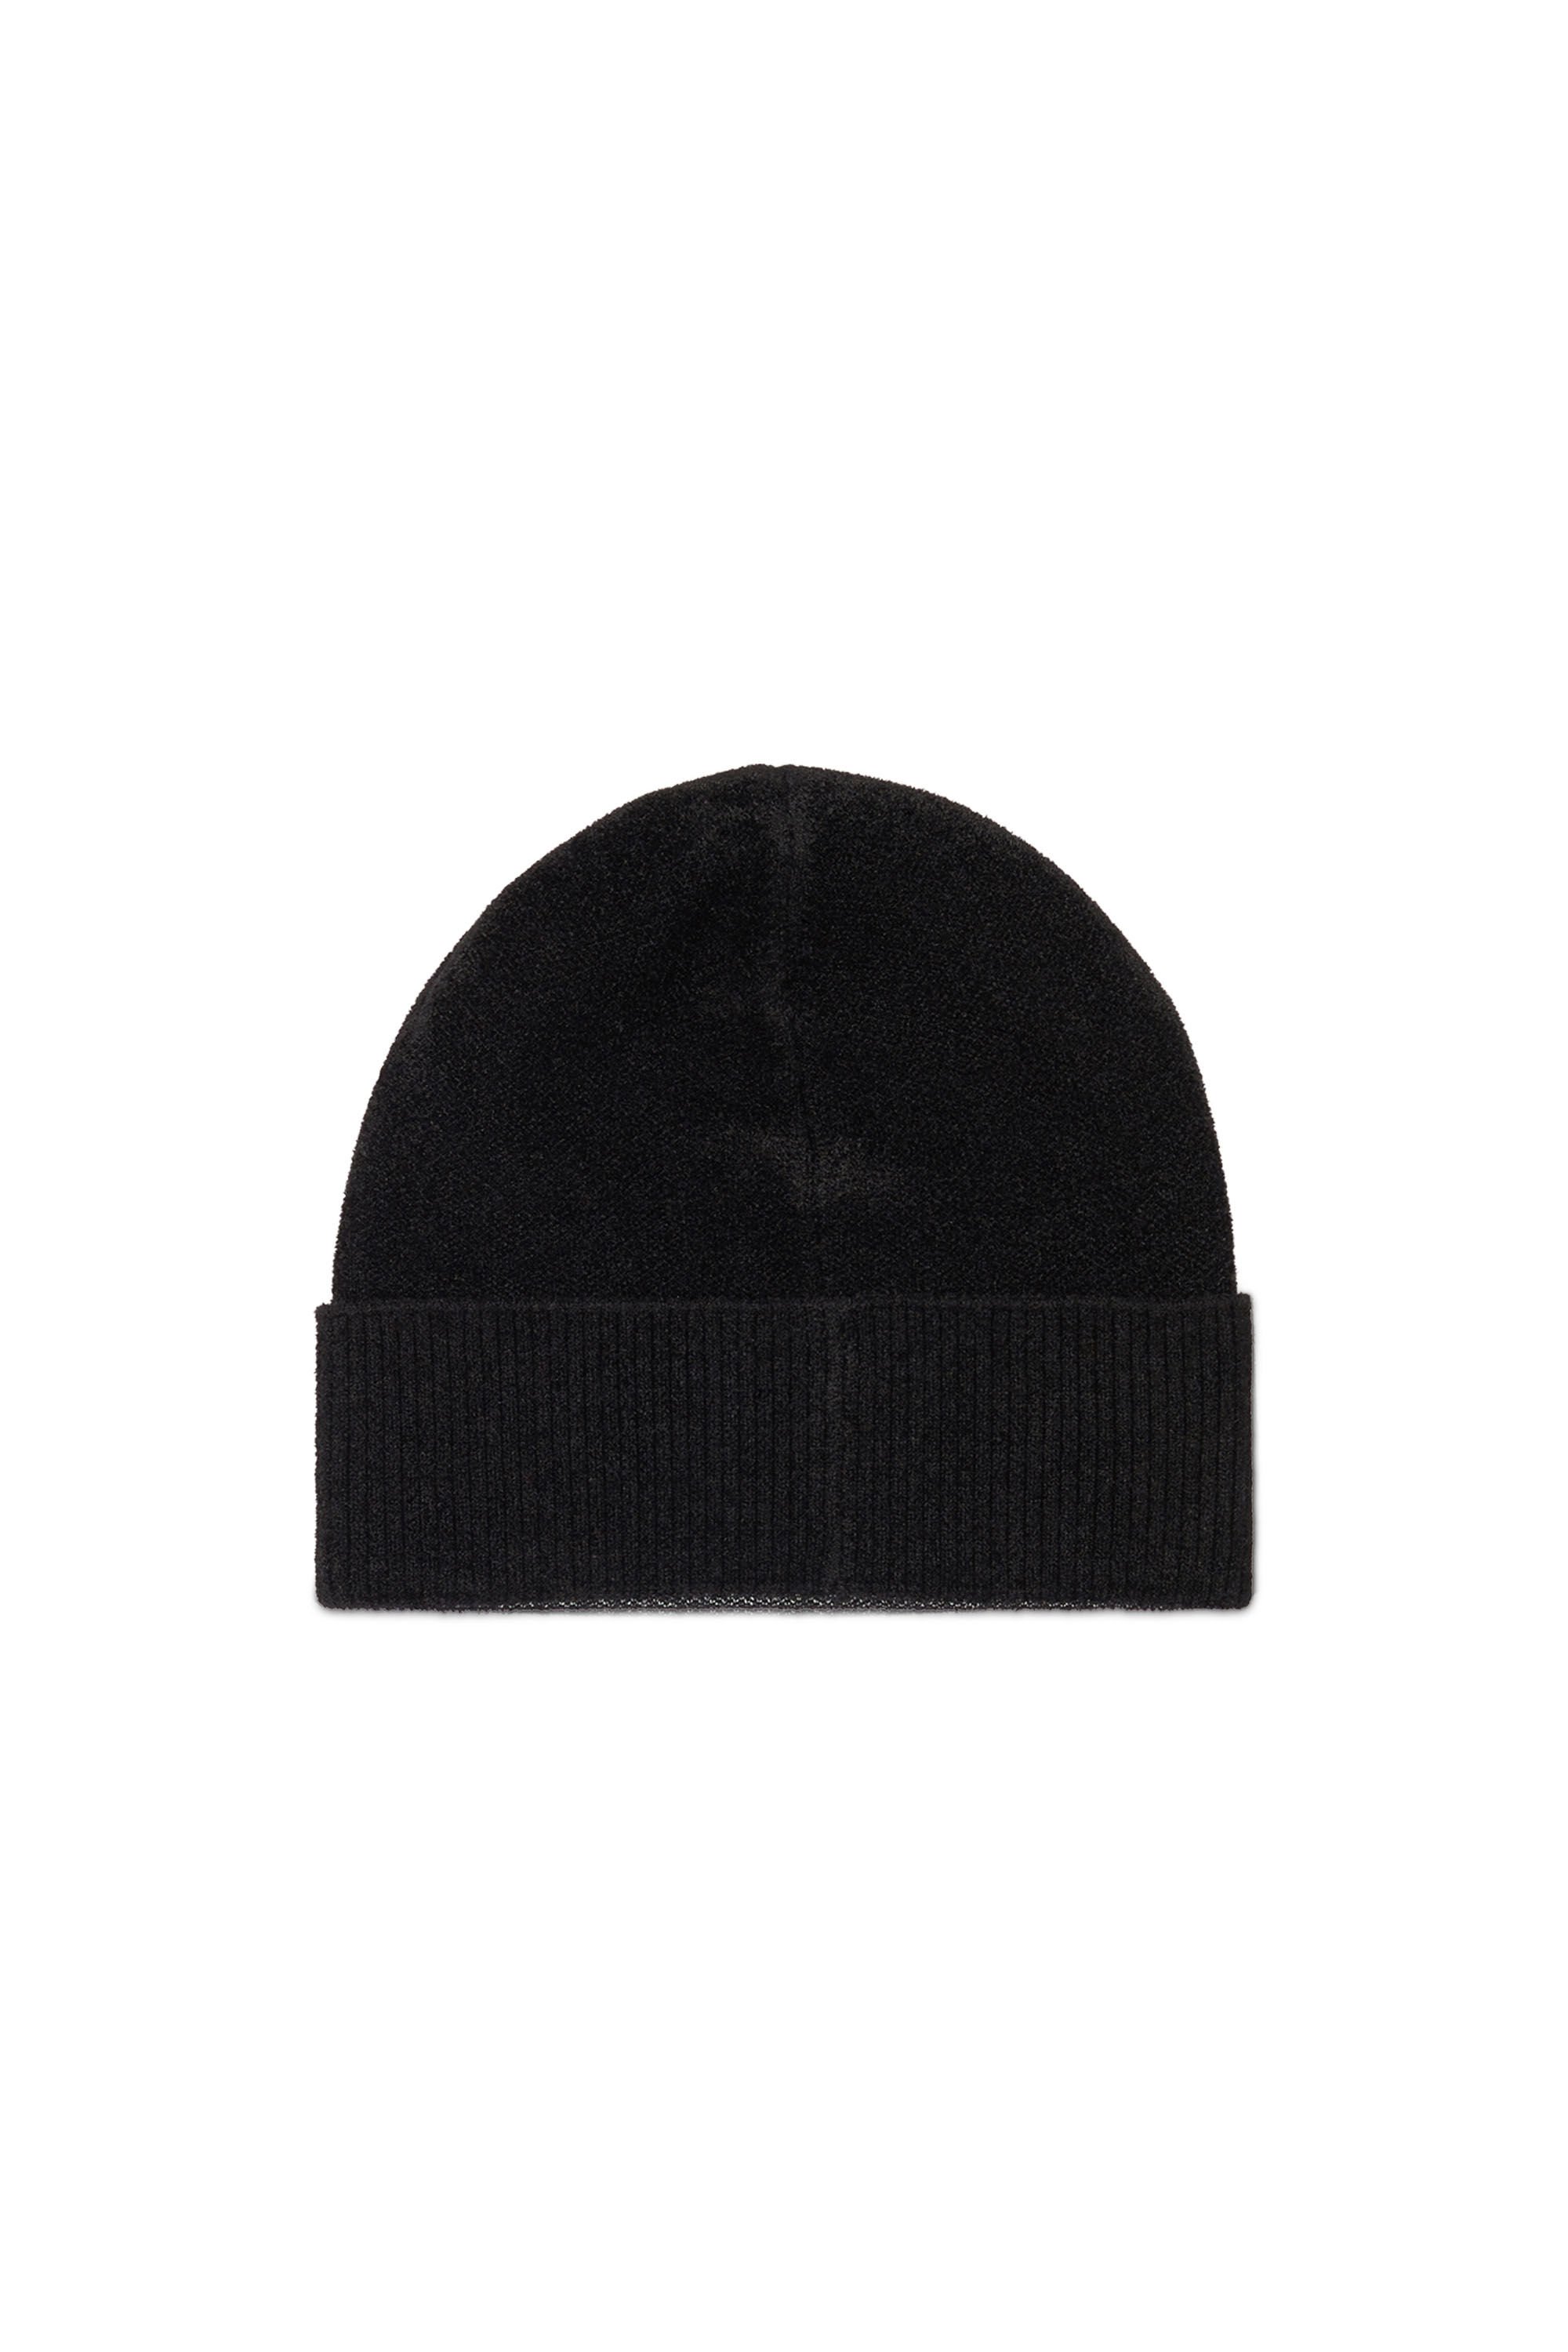 Women's Beanie with distressed oval D logo | Black | Diesel